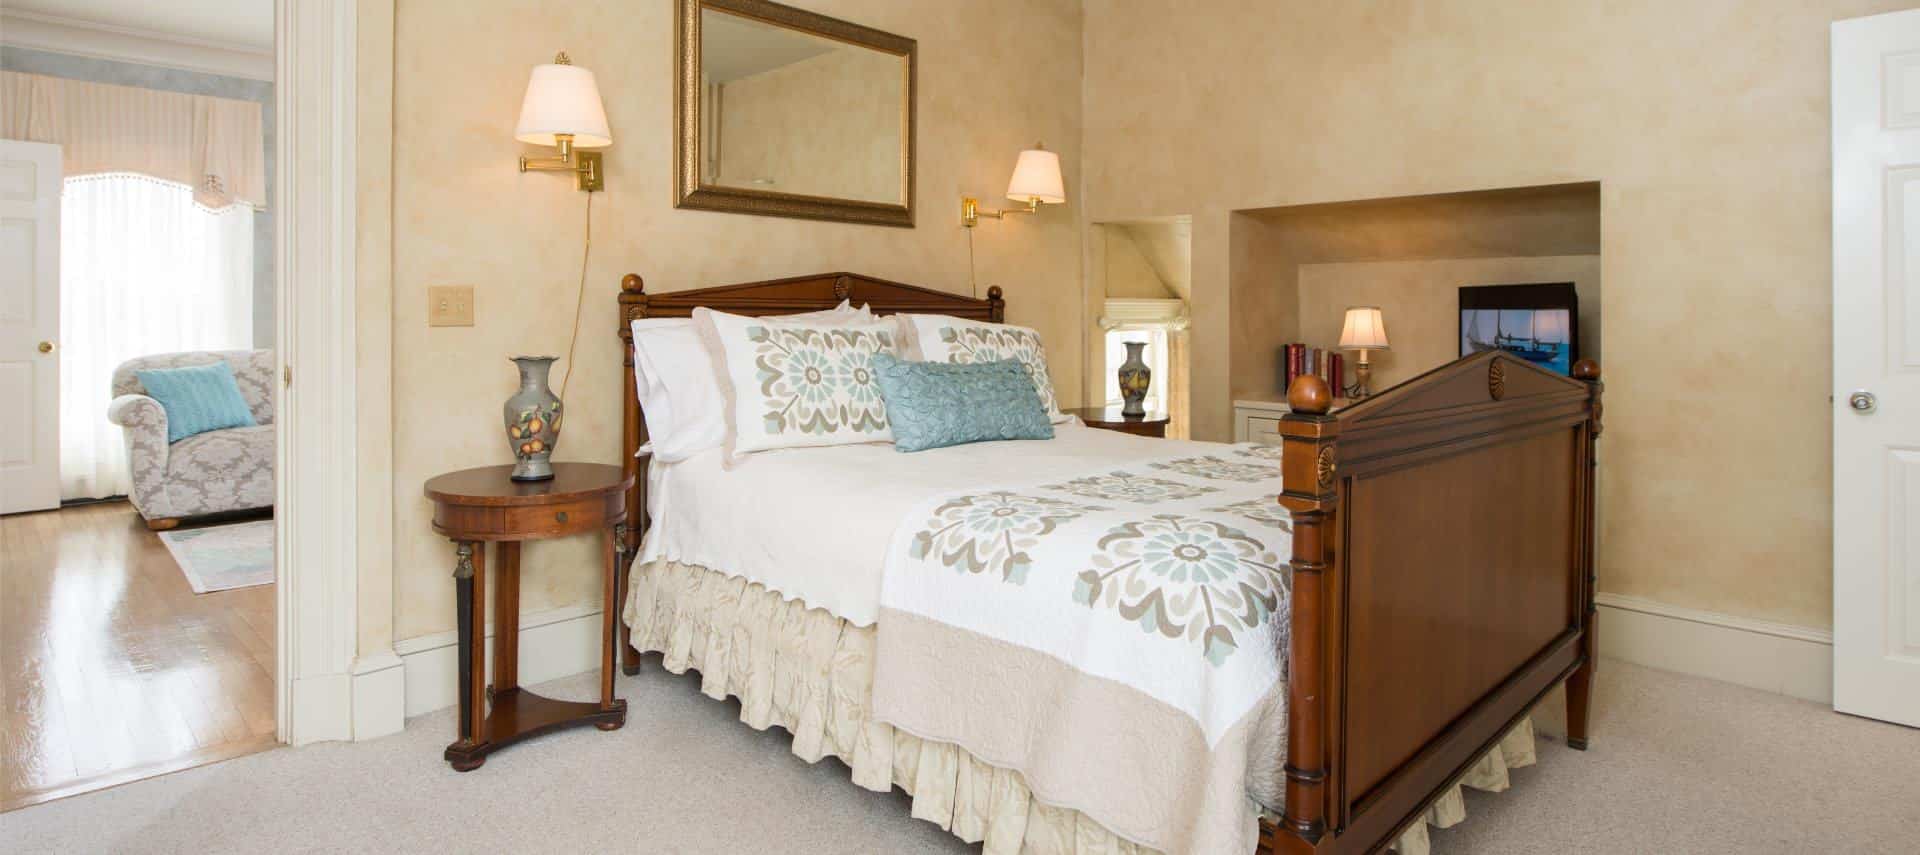 Bedroom with cream colored walls and light colored carpeting, dark wooden furntiture, white, tan, and light blue bedding, and sconce lamps attached to the wall